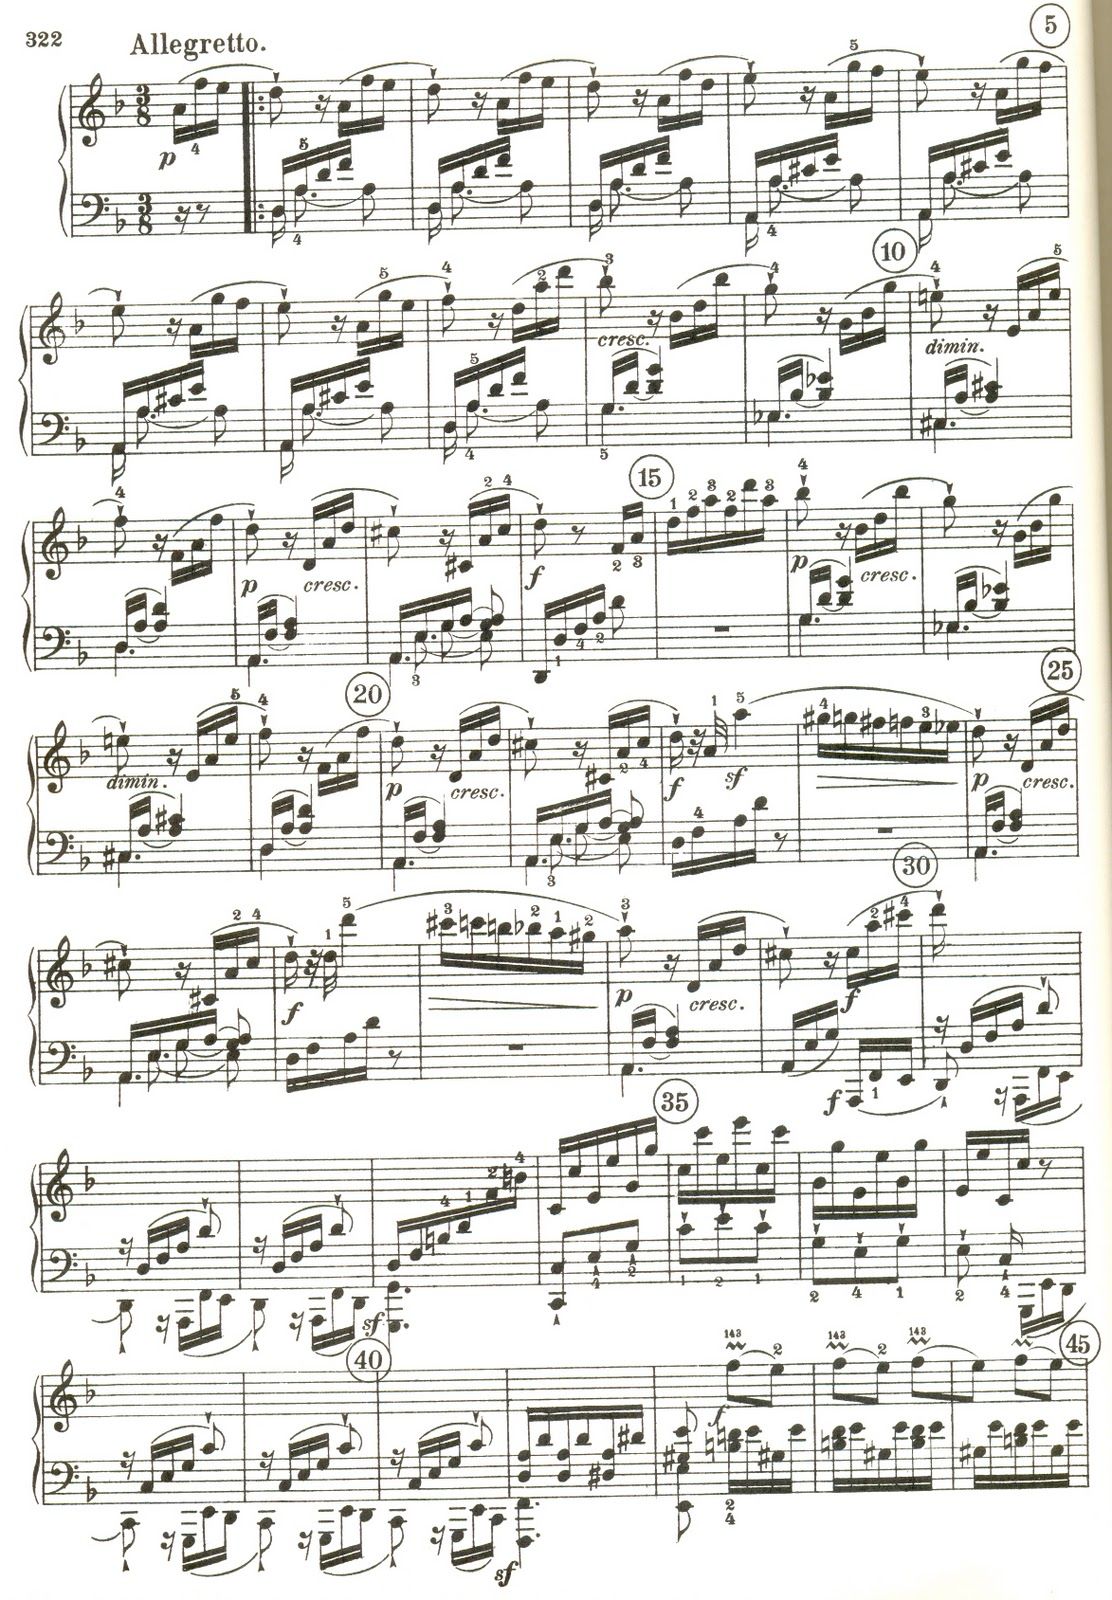 beethoven tempest sonata 3rd movement pdf viewer